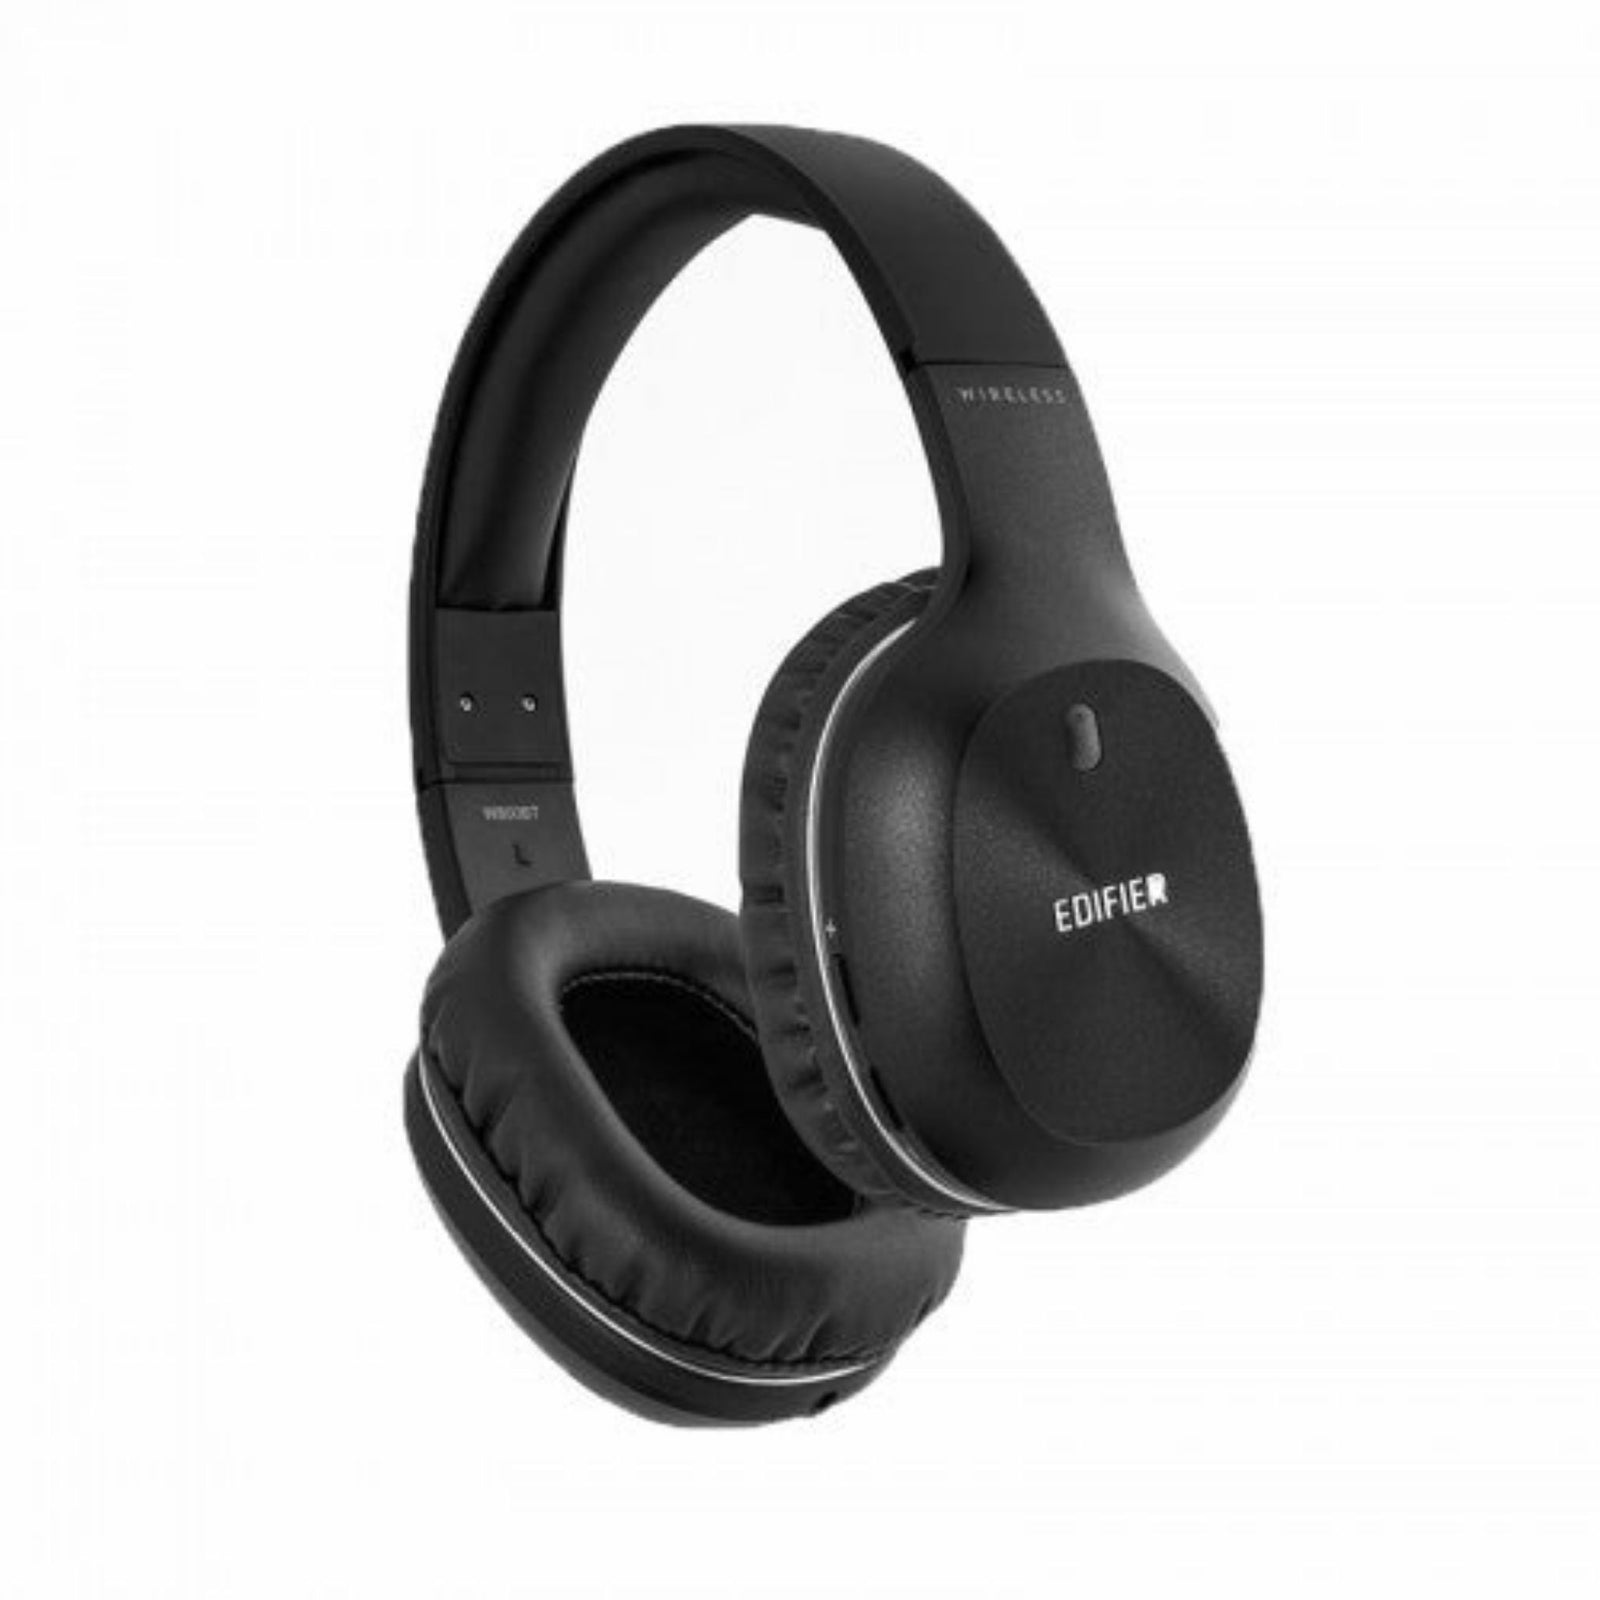 Anker Soundcore Life 2 Neo Wireless Headphones with Microphone - Black, Best price in Egypt